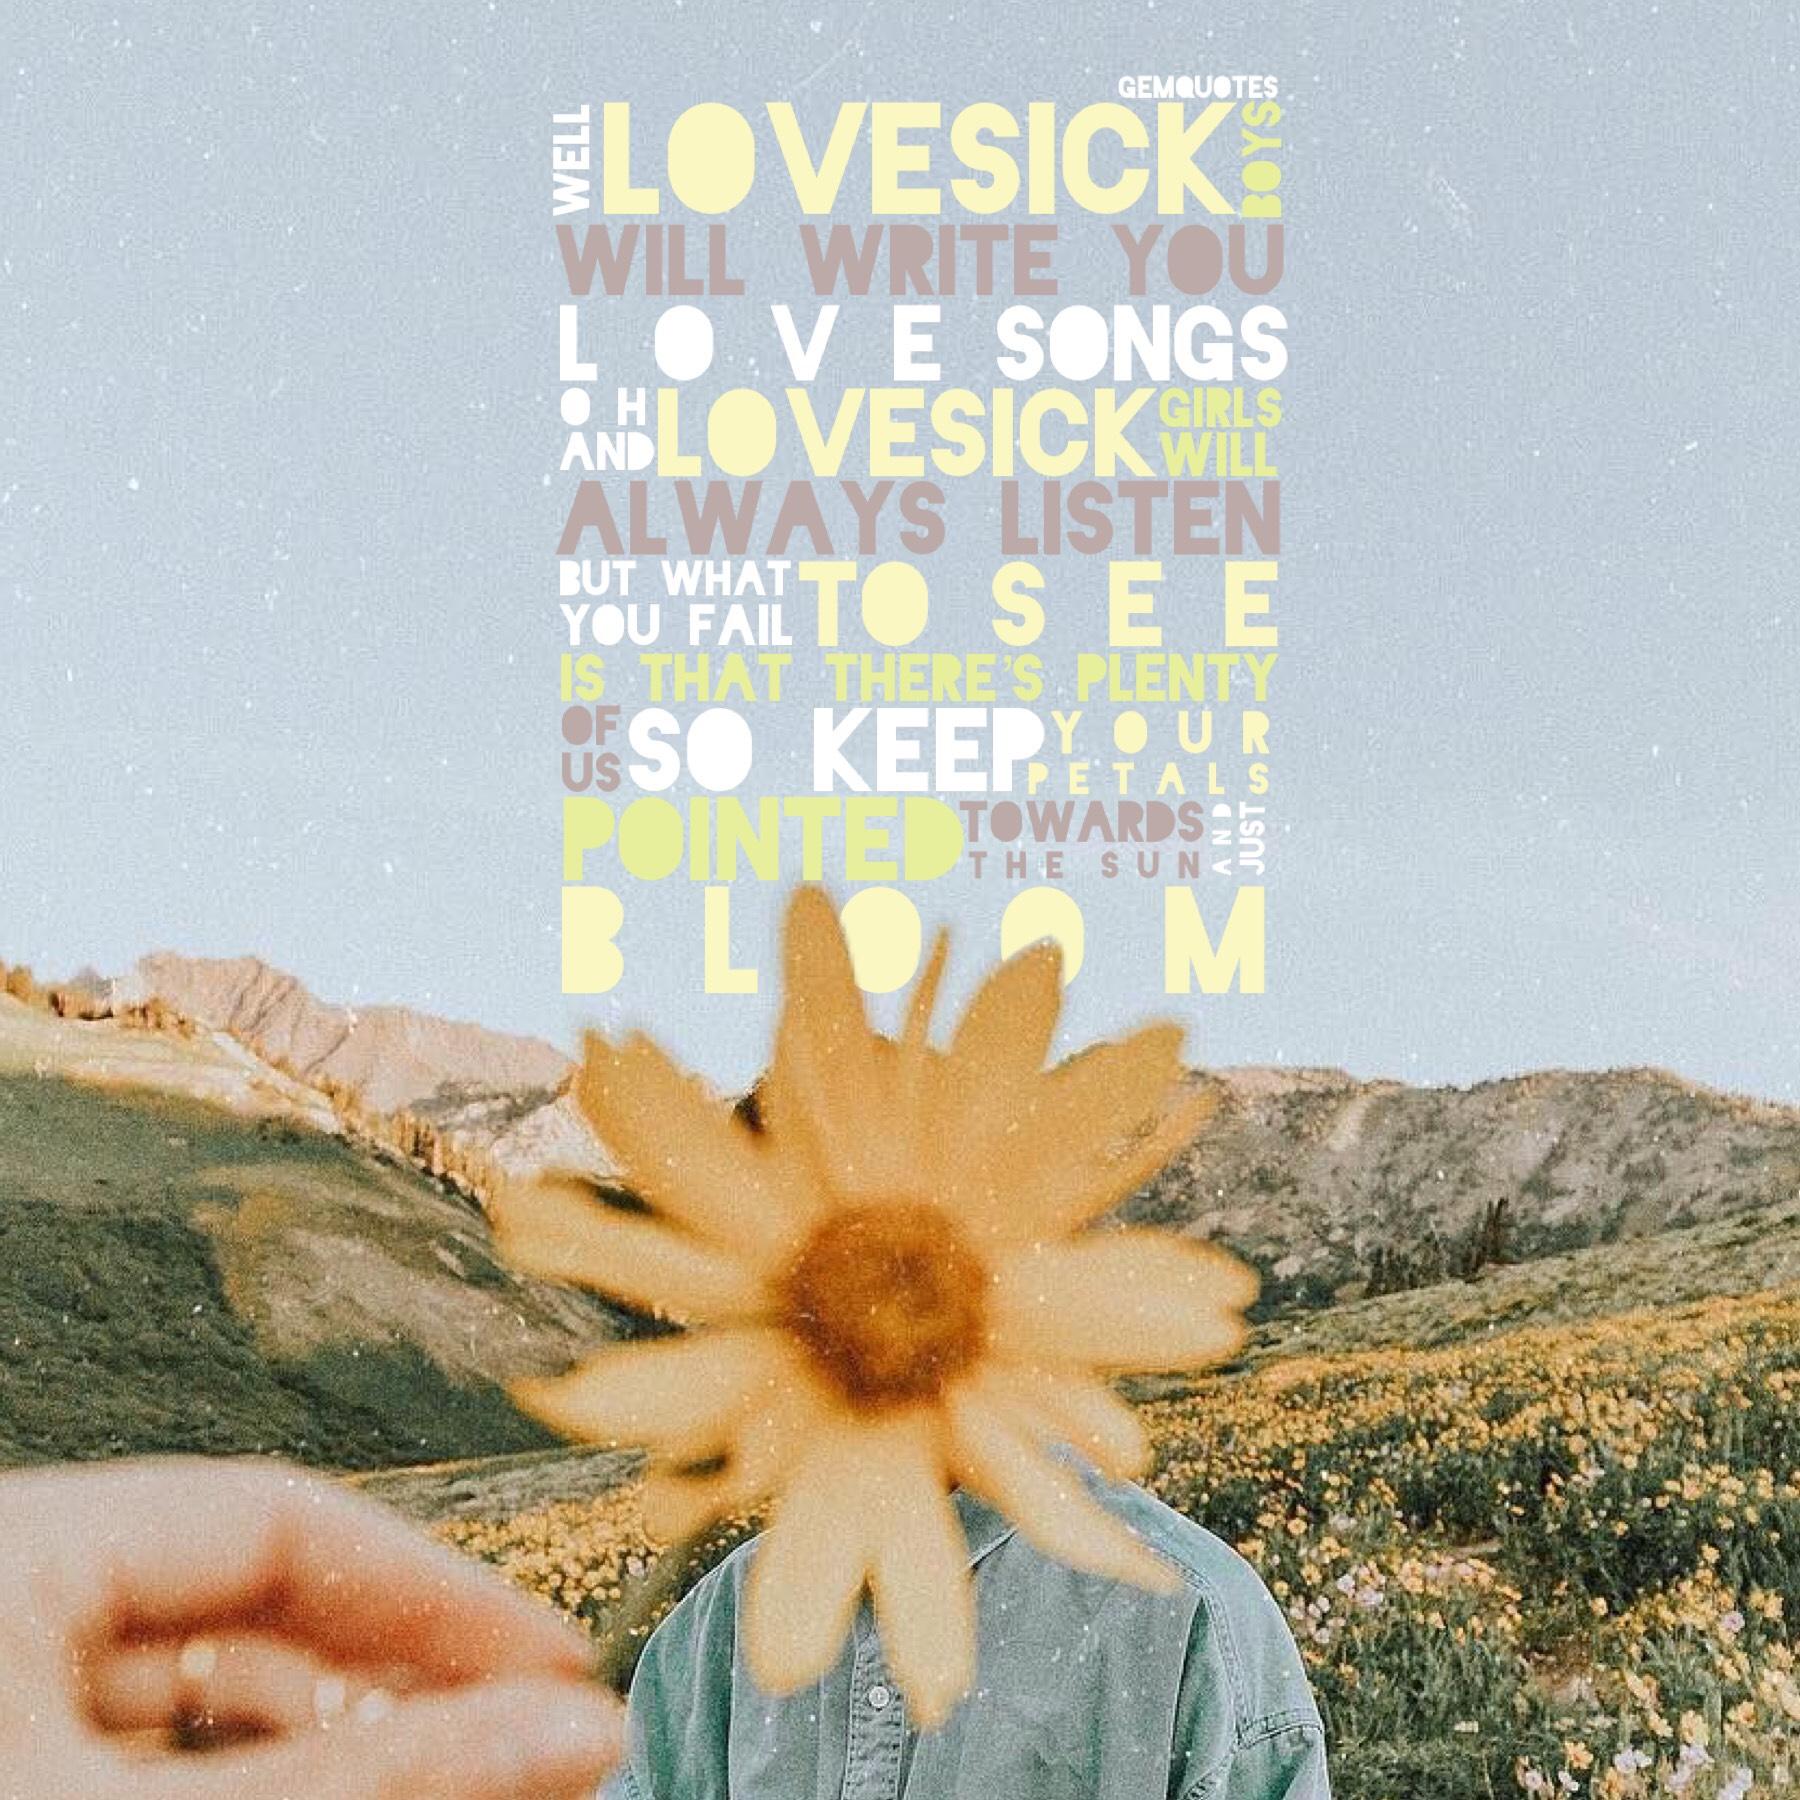 “🌼TAP🌼”
“Lovesick Boys” by Conan Gray💕 inspired partly from @Triplet-klf again because that girl is SO TALENTED. Waiting impatiently for “The Eldest Curses” to get here and listening to Troye Sivan💗 sending lovely vibes and sunshine~~☀️❤️